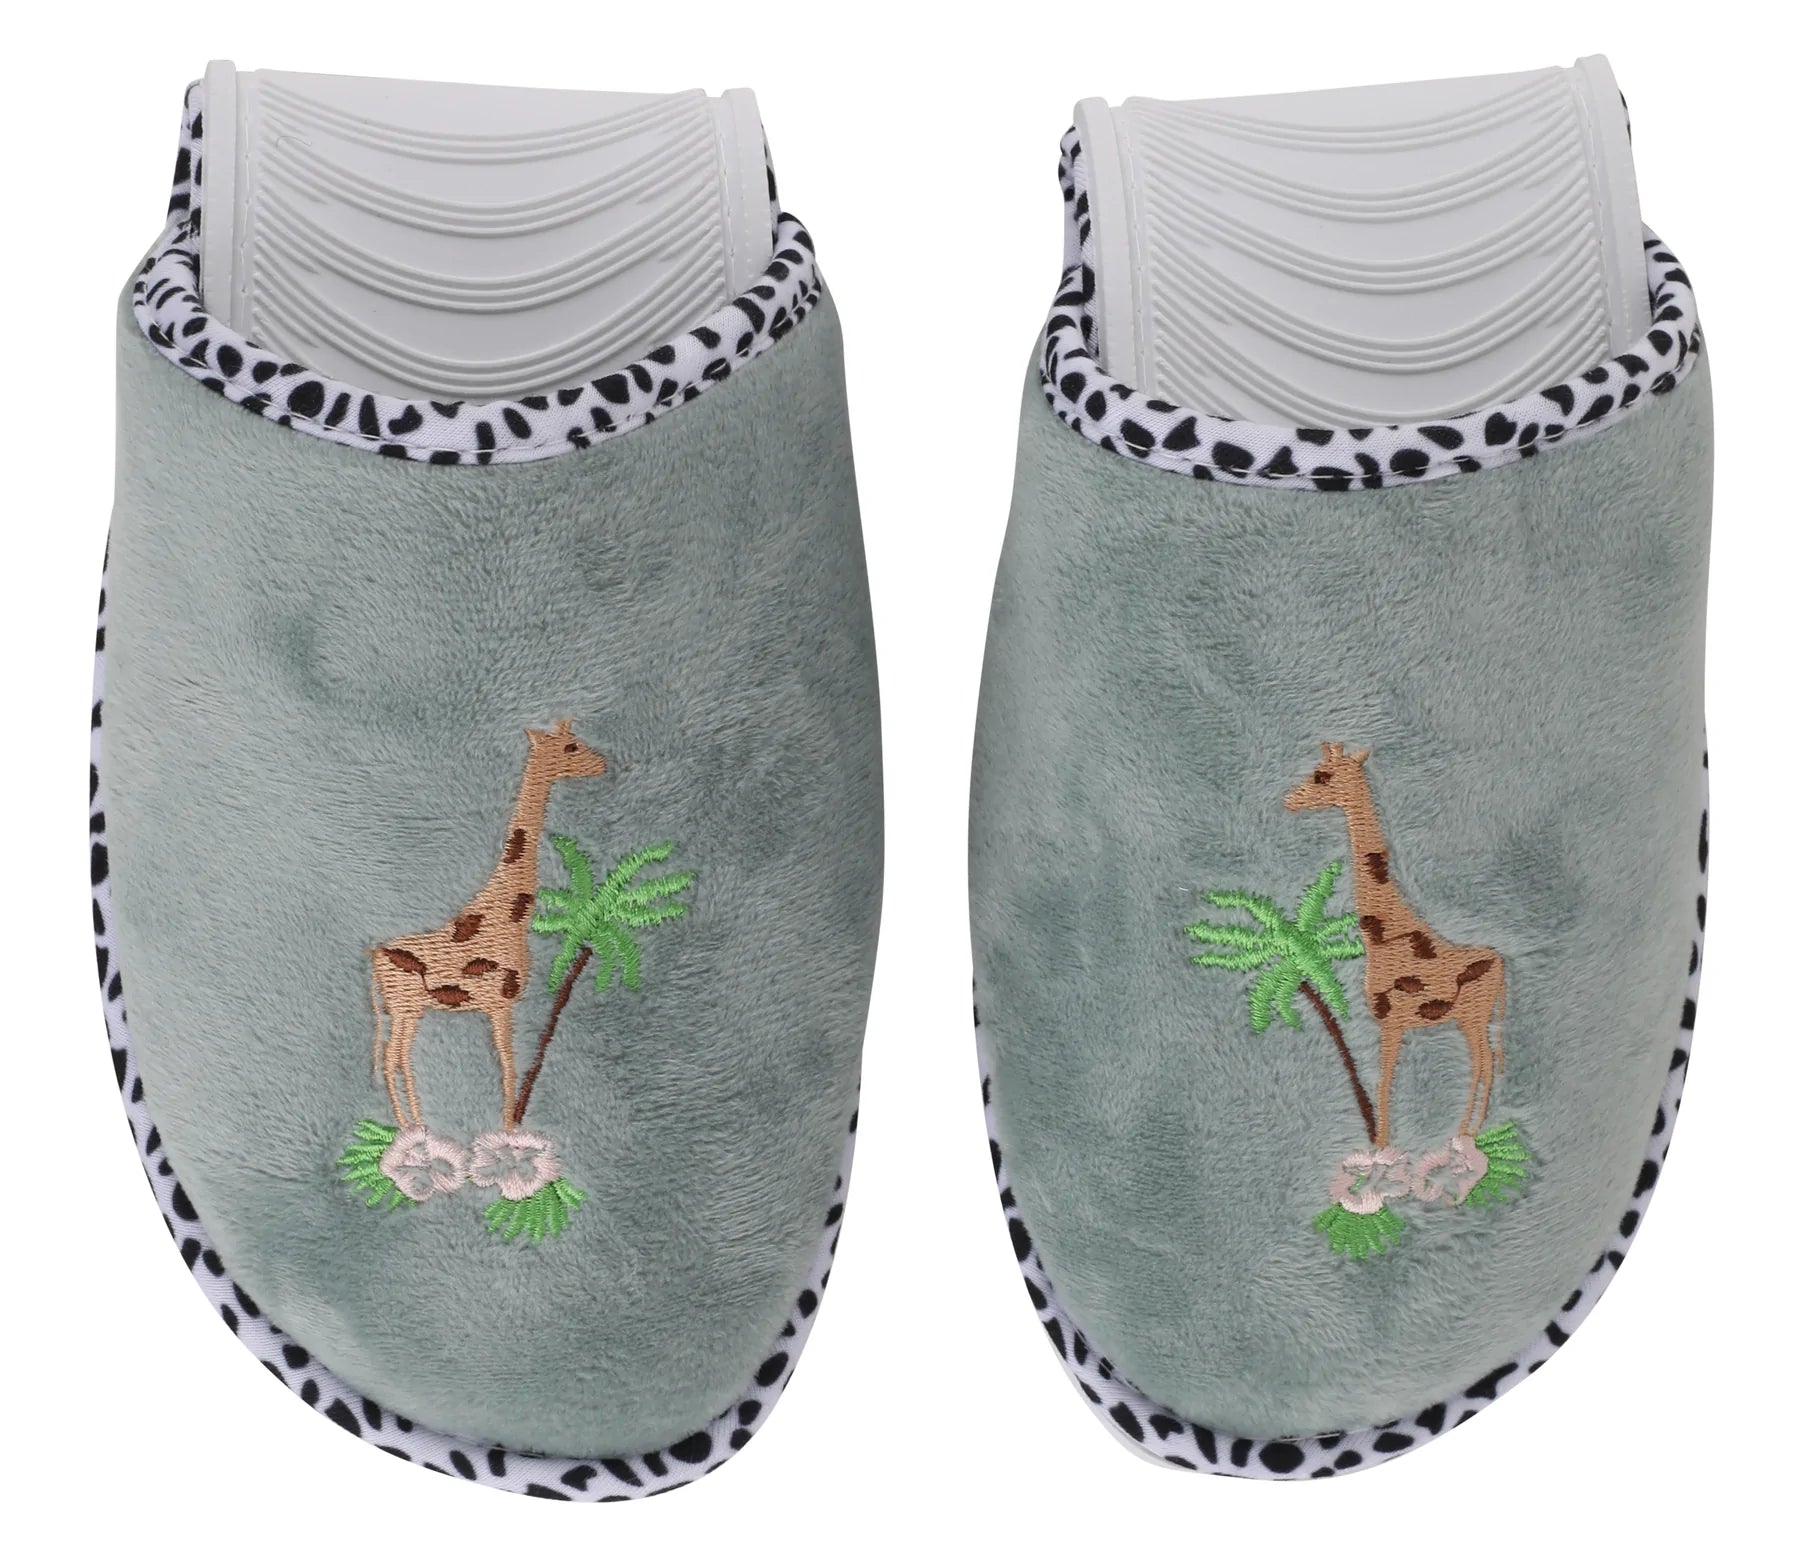 UNIKONCEPT Lifestyle Boutique and Lounge; Hang Accessories Giraffe Slippers and Pouch Set